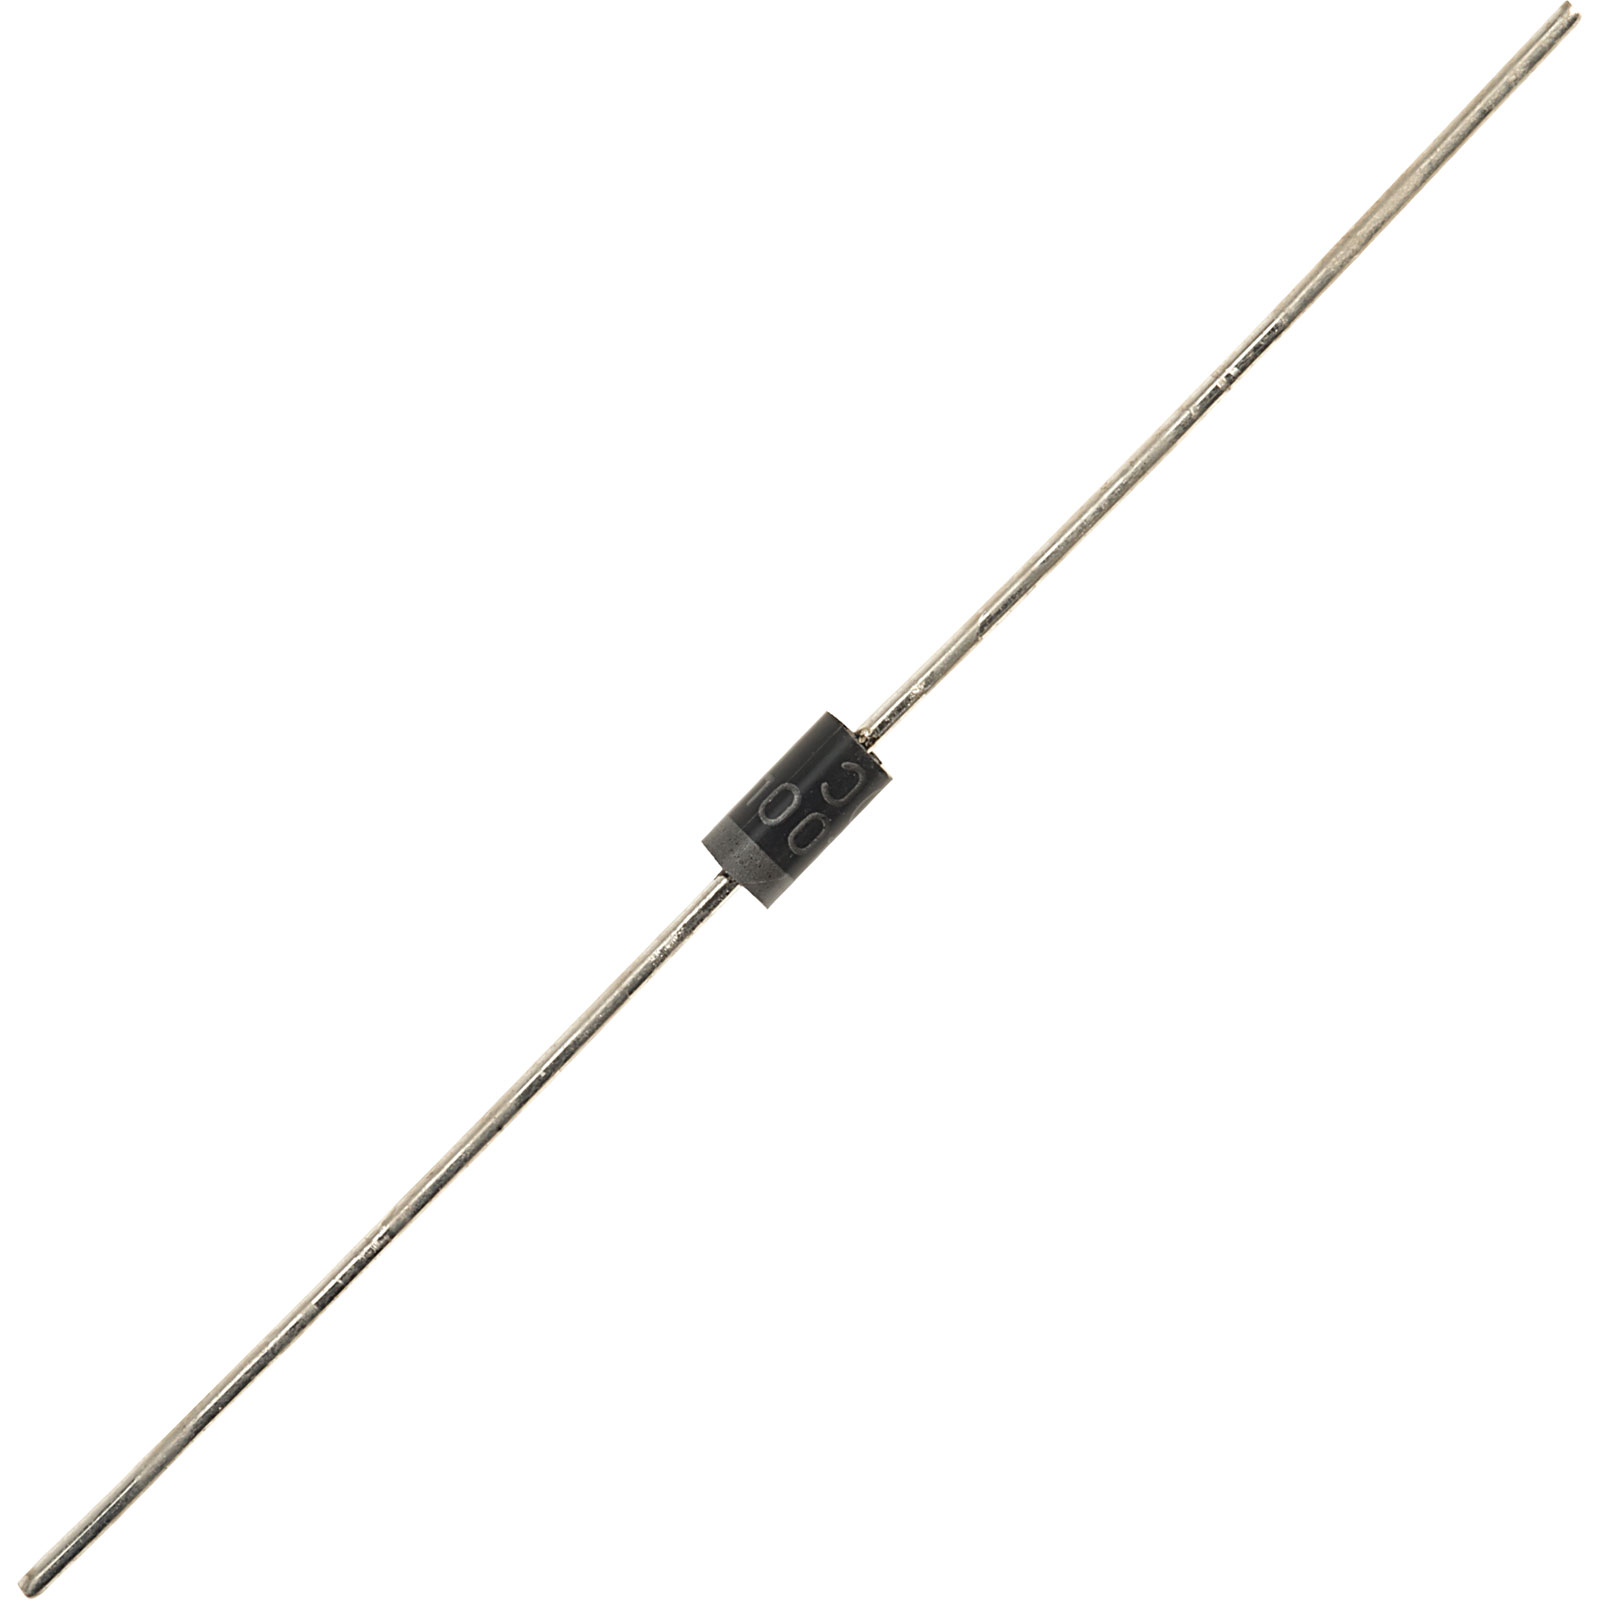 In 4500 DC Diode. In 4500 DC Diode альтернатива. Диод uf4004 характеристики на русском. 1n4004